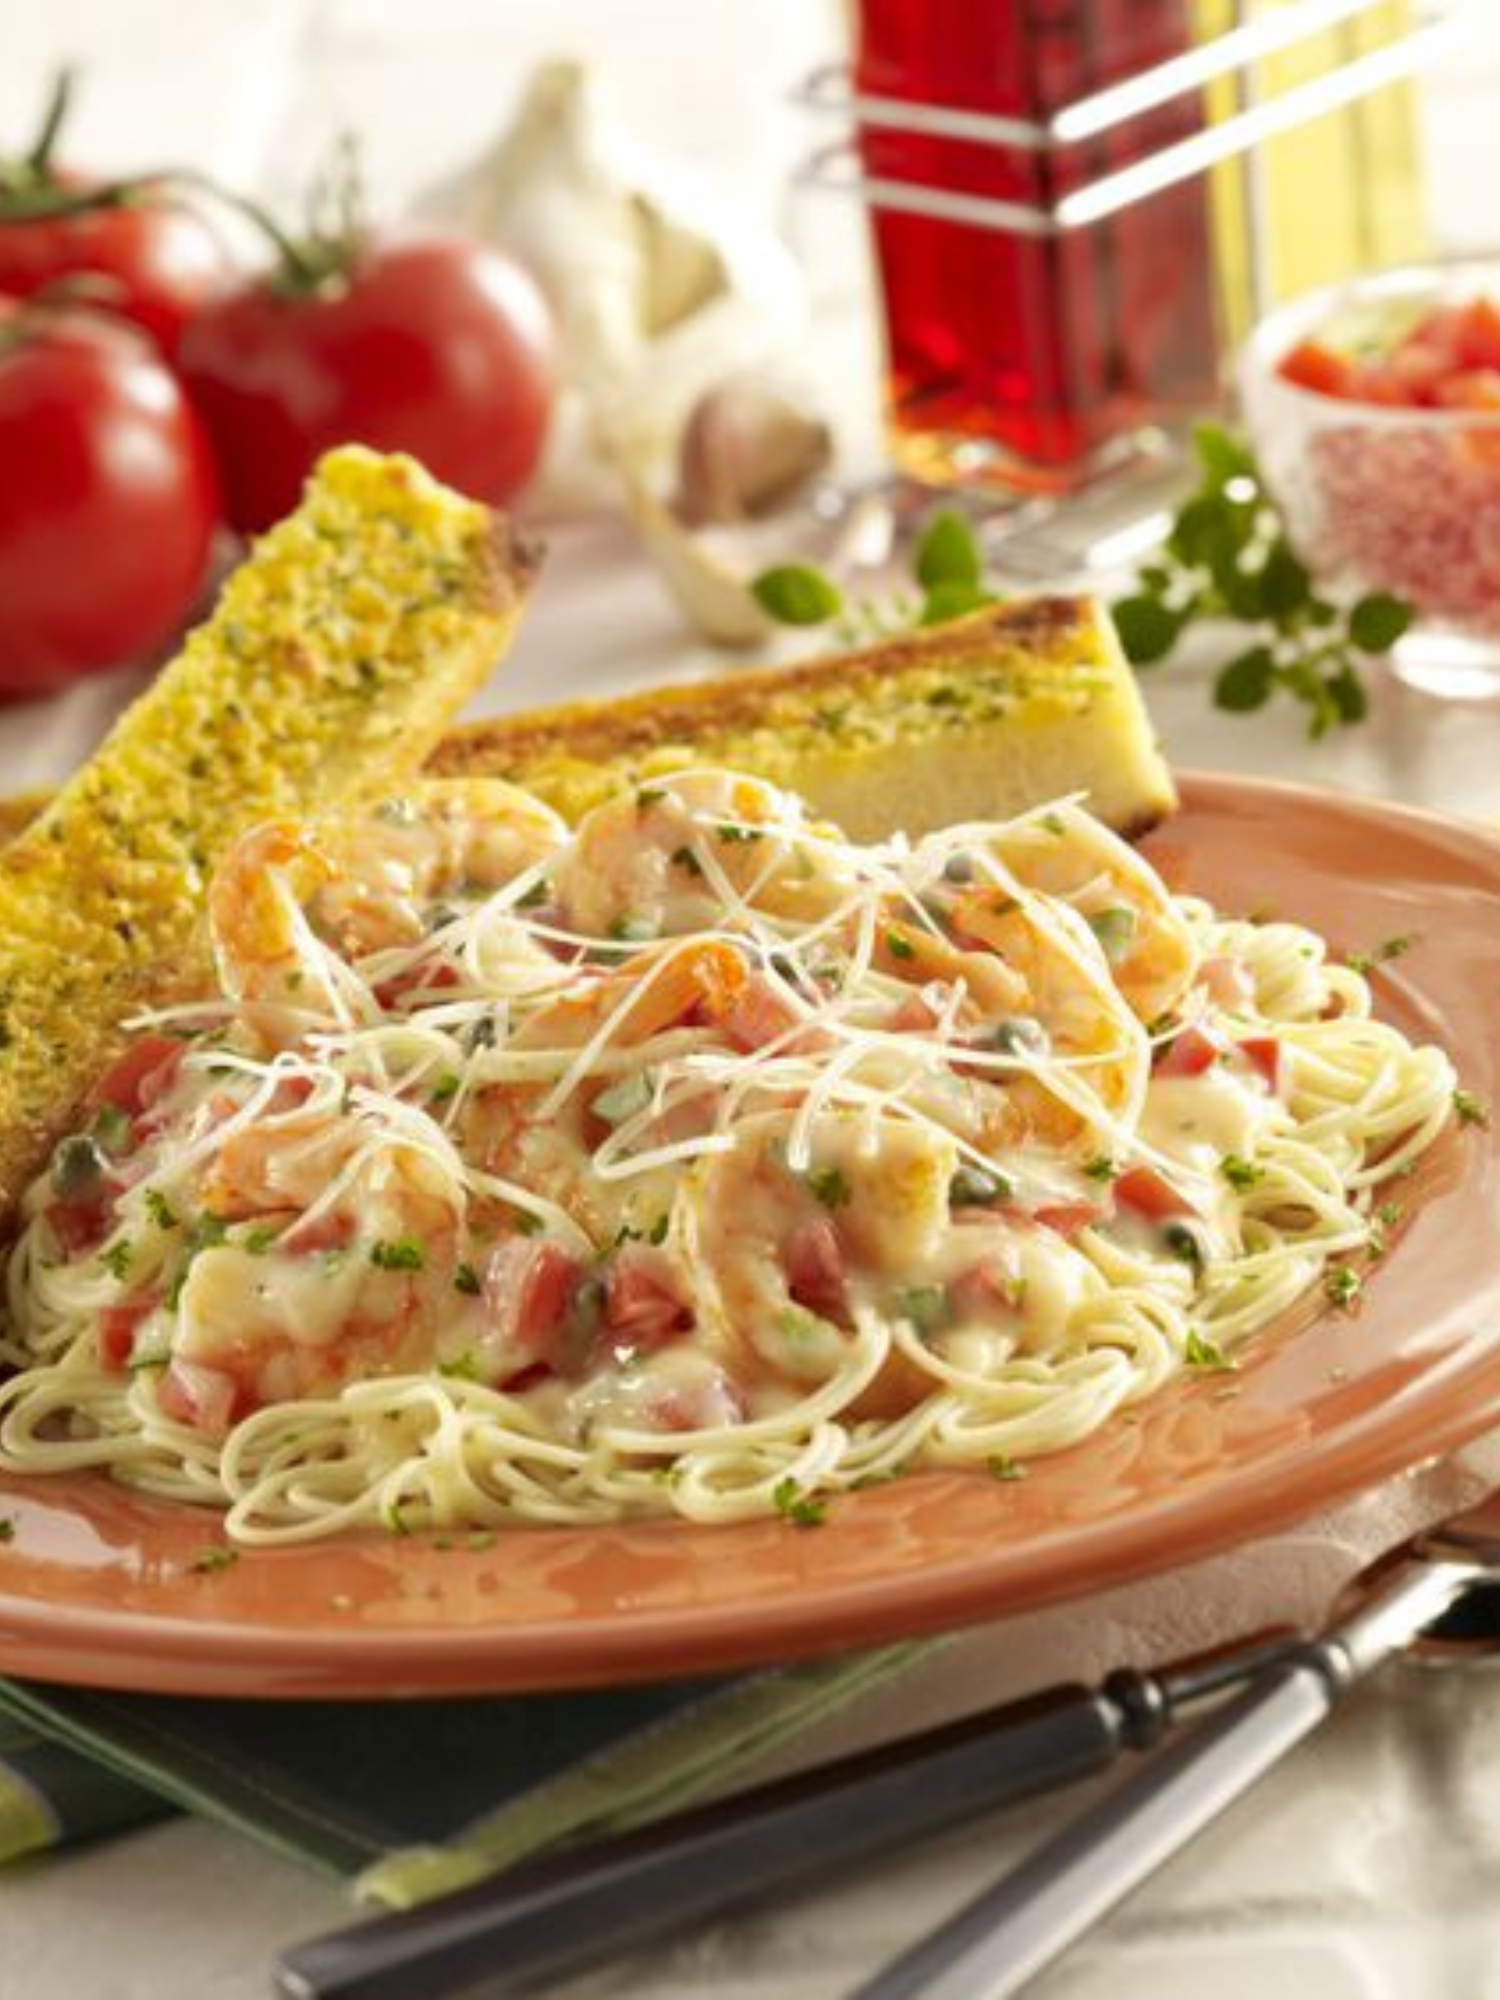 a plate of low fat shrimp pasta with two pieces of french bread and tomatoes in the background